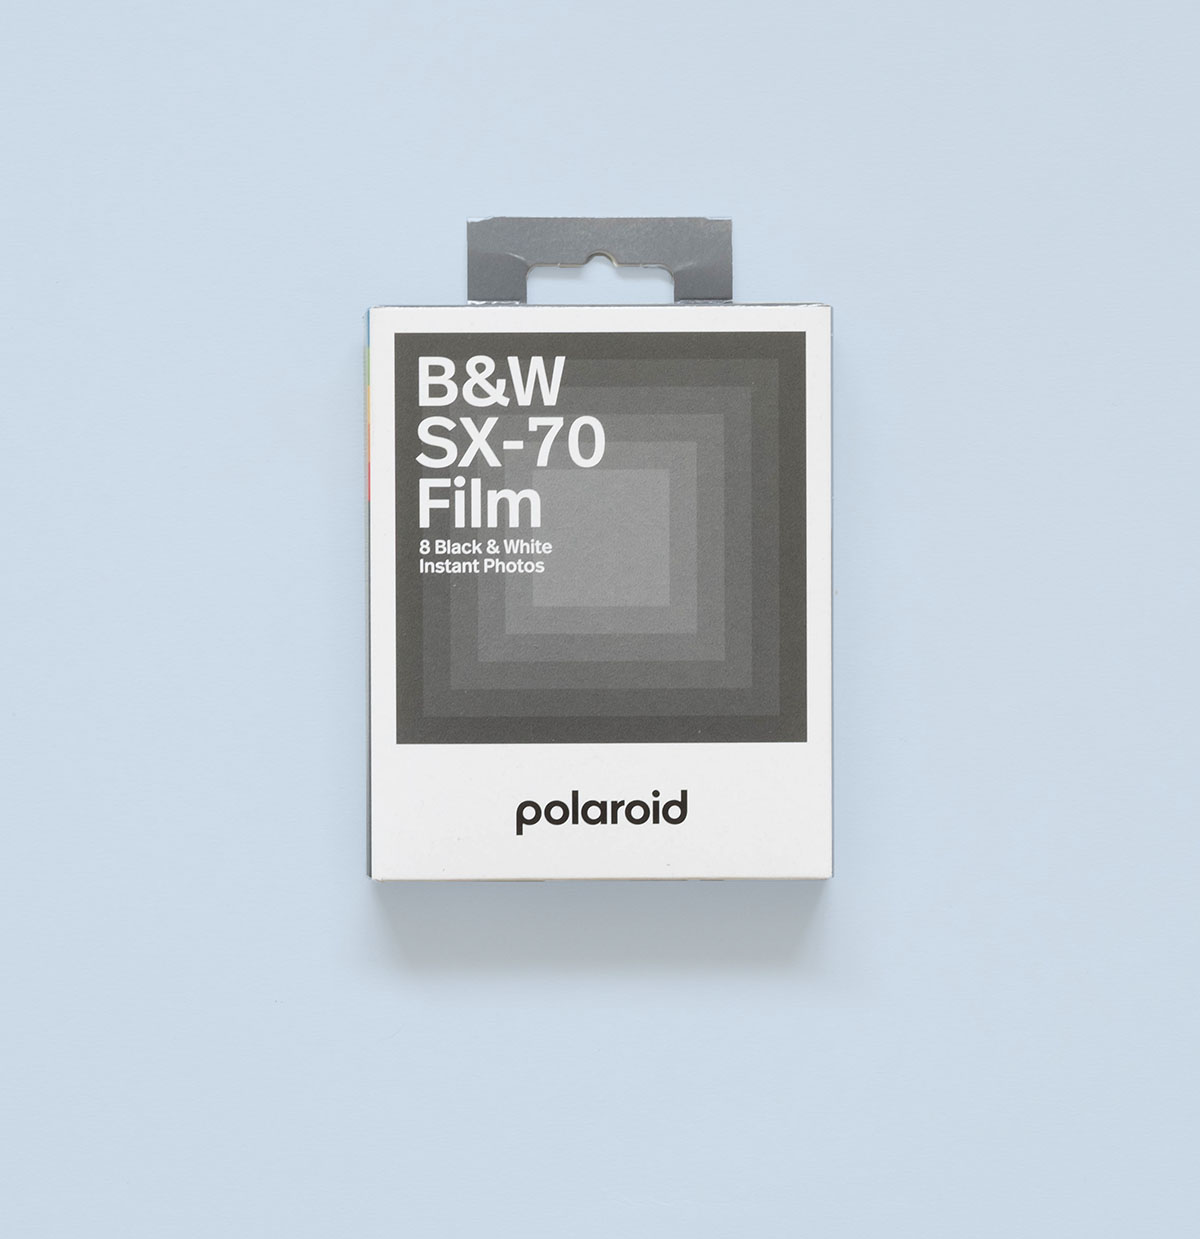 Polaroid Film Types Explained - Understanding the differences between i-Type,  600, SX-70, Go, & 8x10 